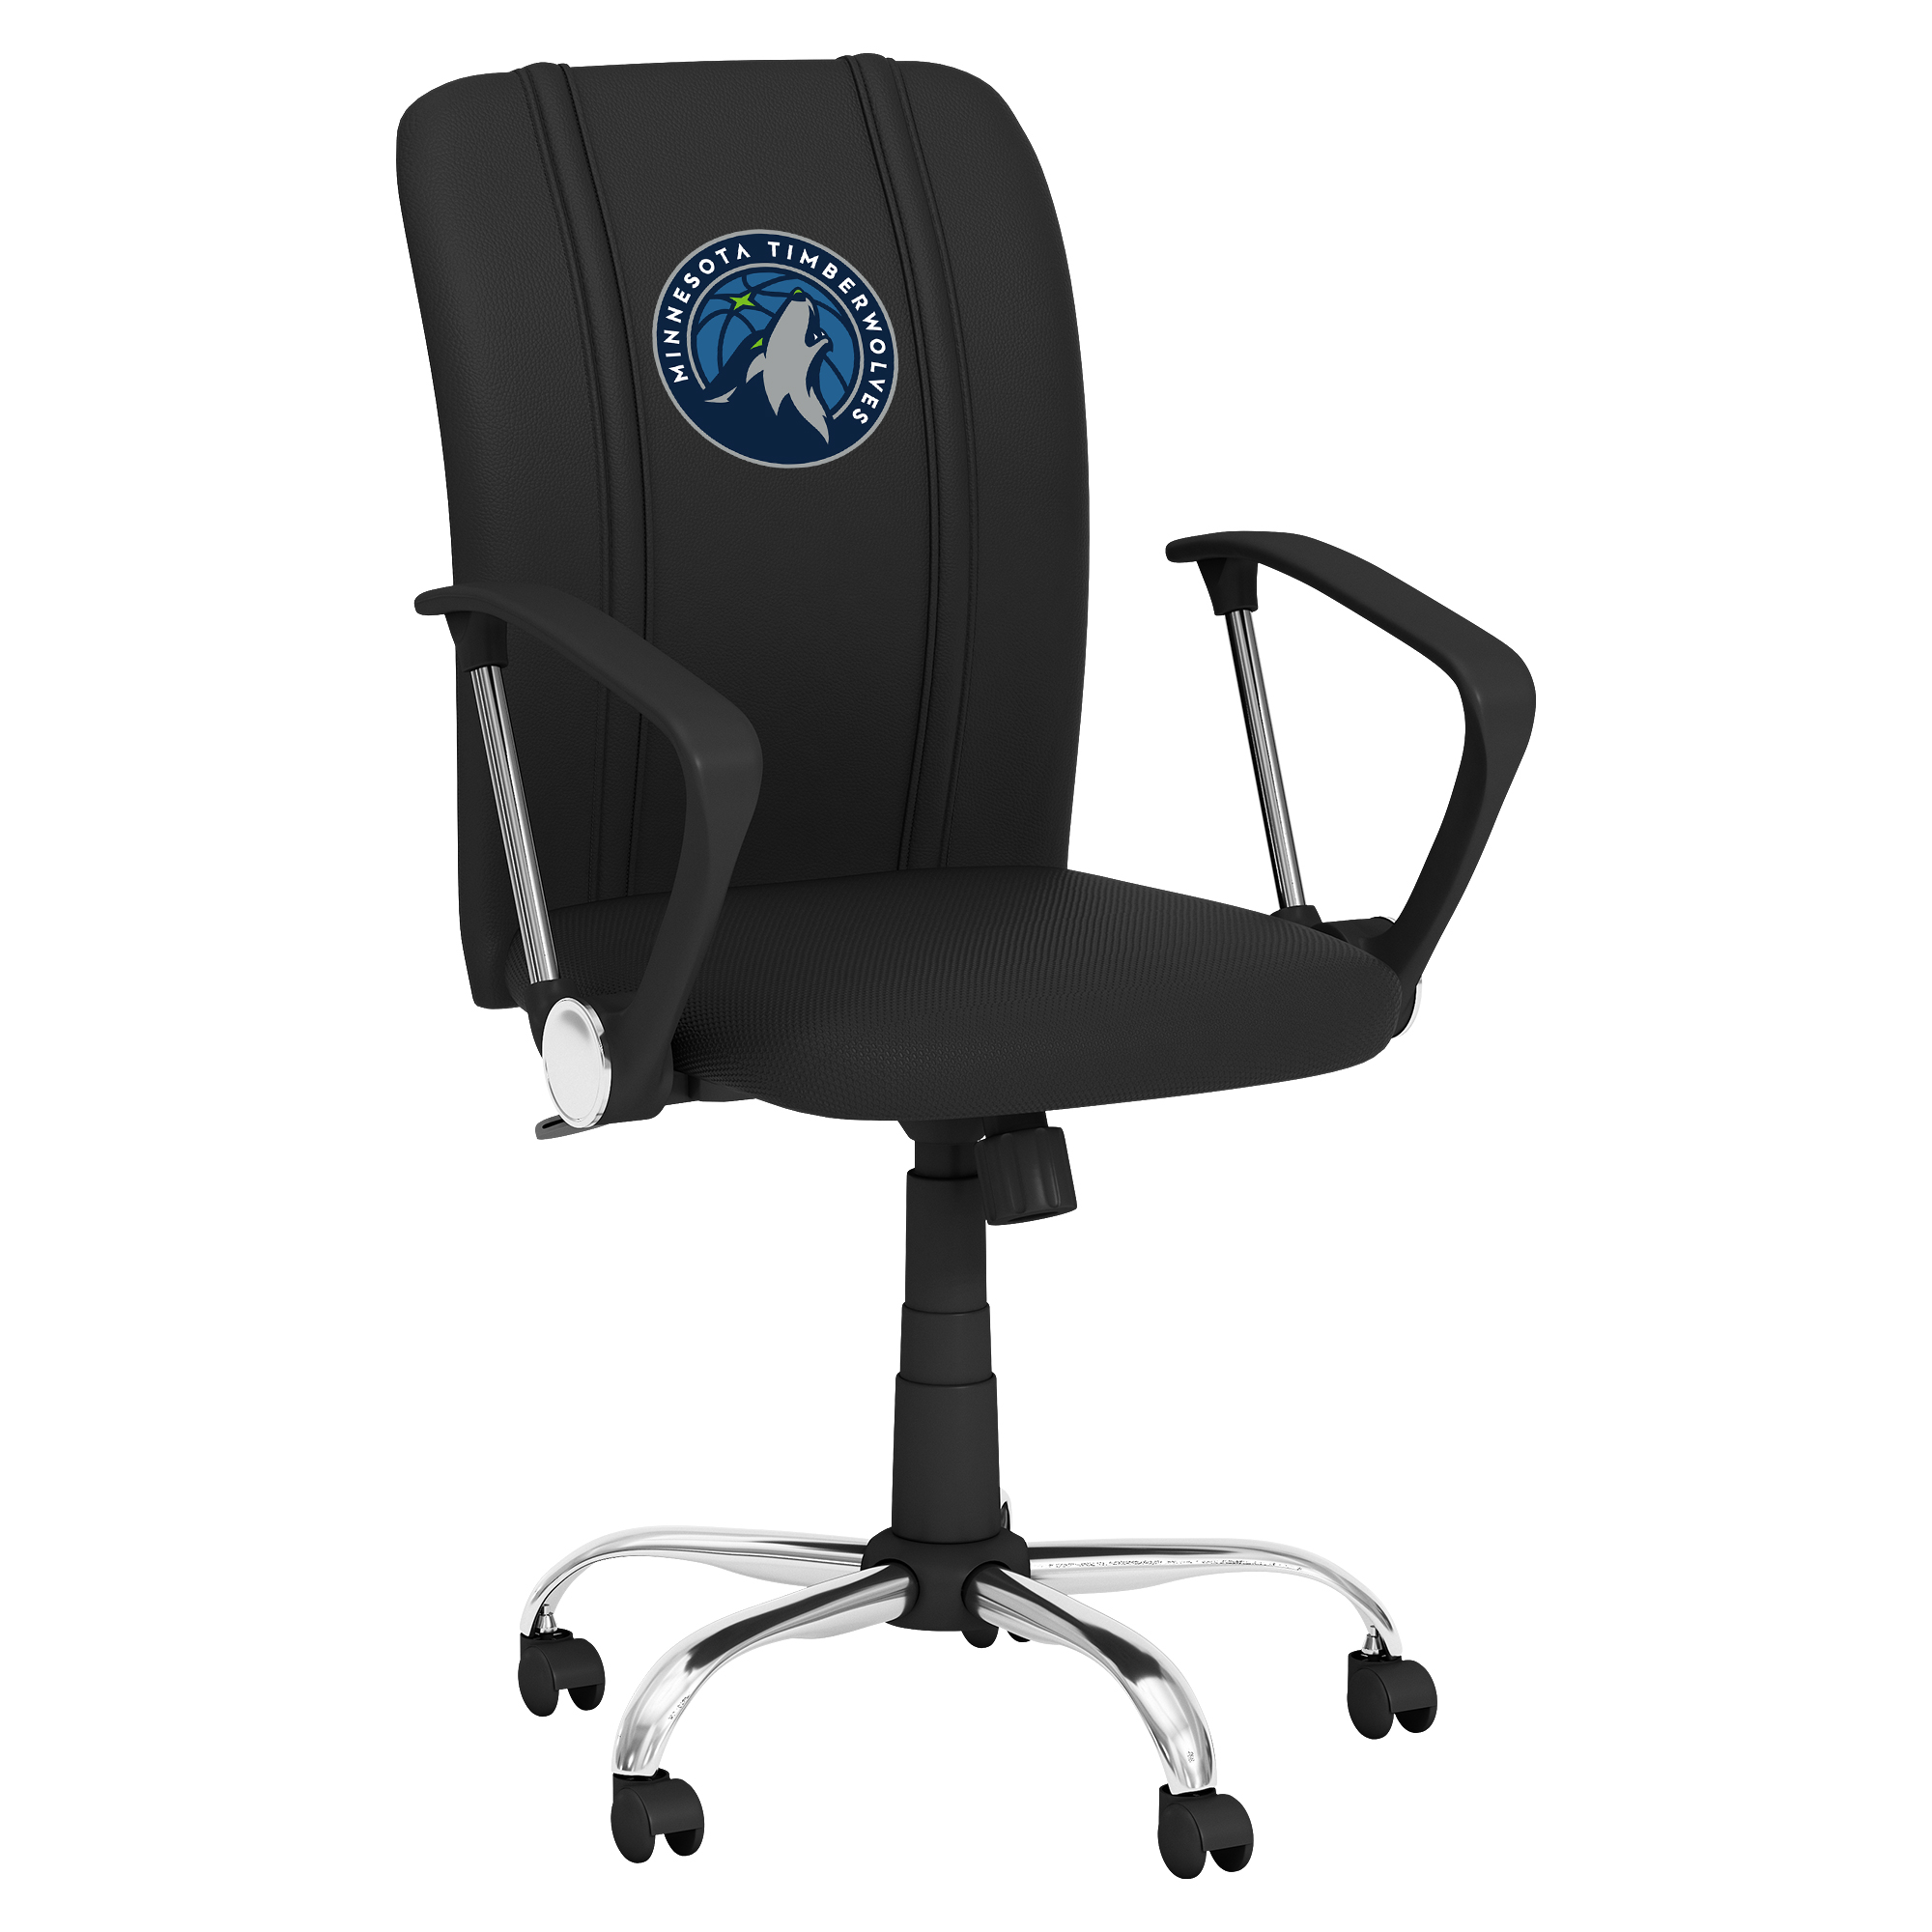 Minnesota Timberwolves Curve Task Chair with Minnesota Timberwolves Primary Logo